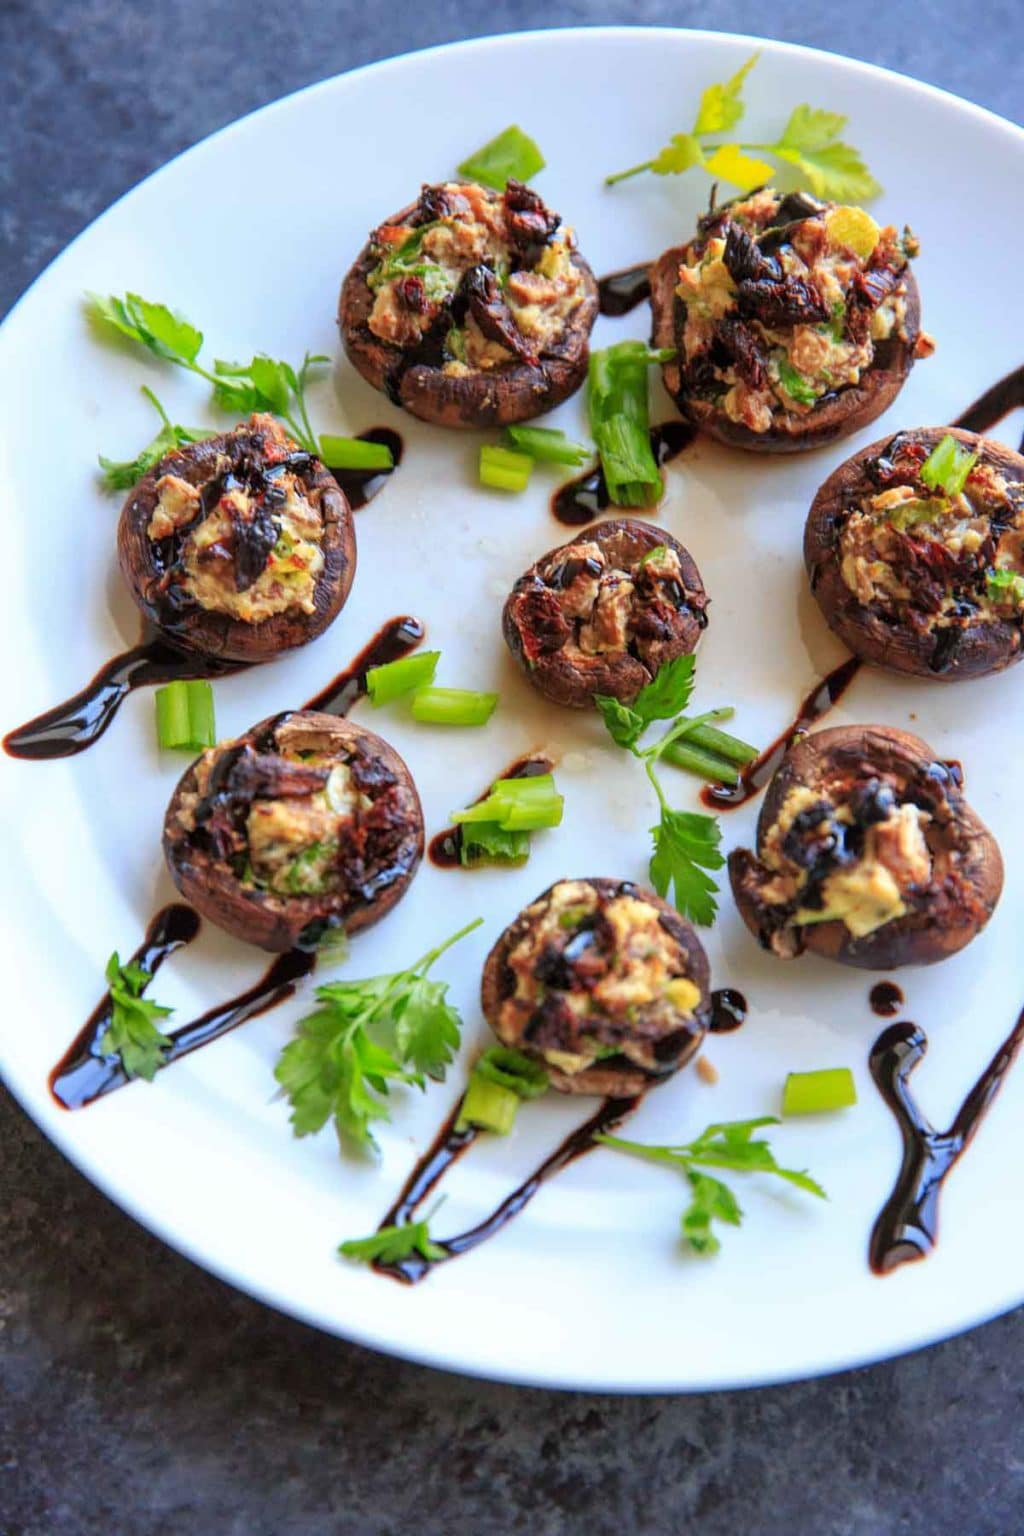 Chevre Stuffed Mushrooms with Sun-dried Tomatoes are an easy finger food or appetizer that is full of flavor! Option to mix it up with different flavors of goat cheese or sprinkle with herbs and balsamic vinegar.